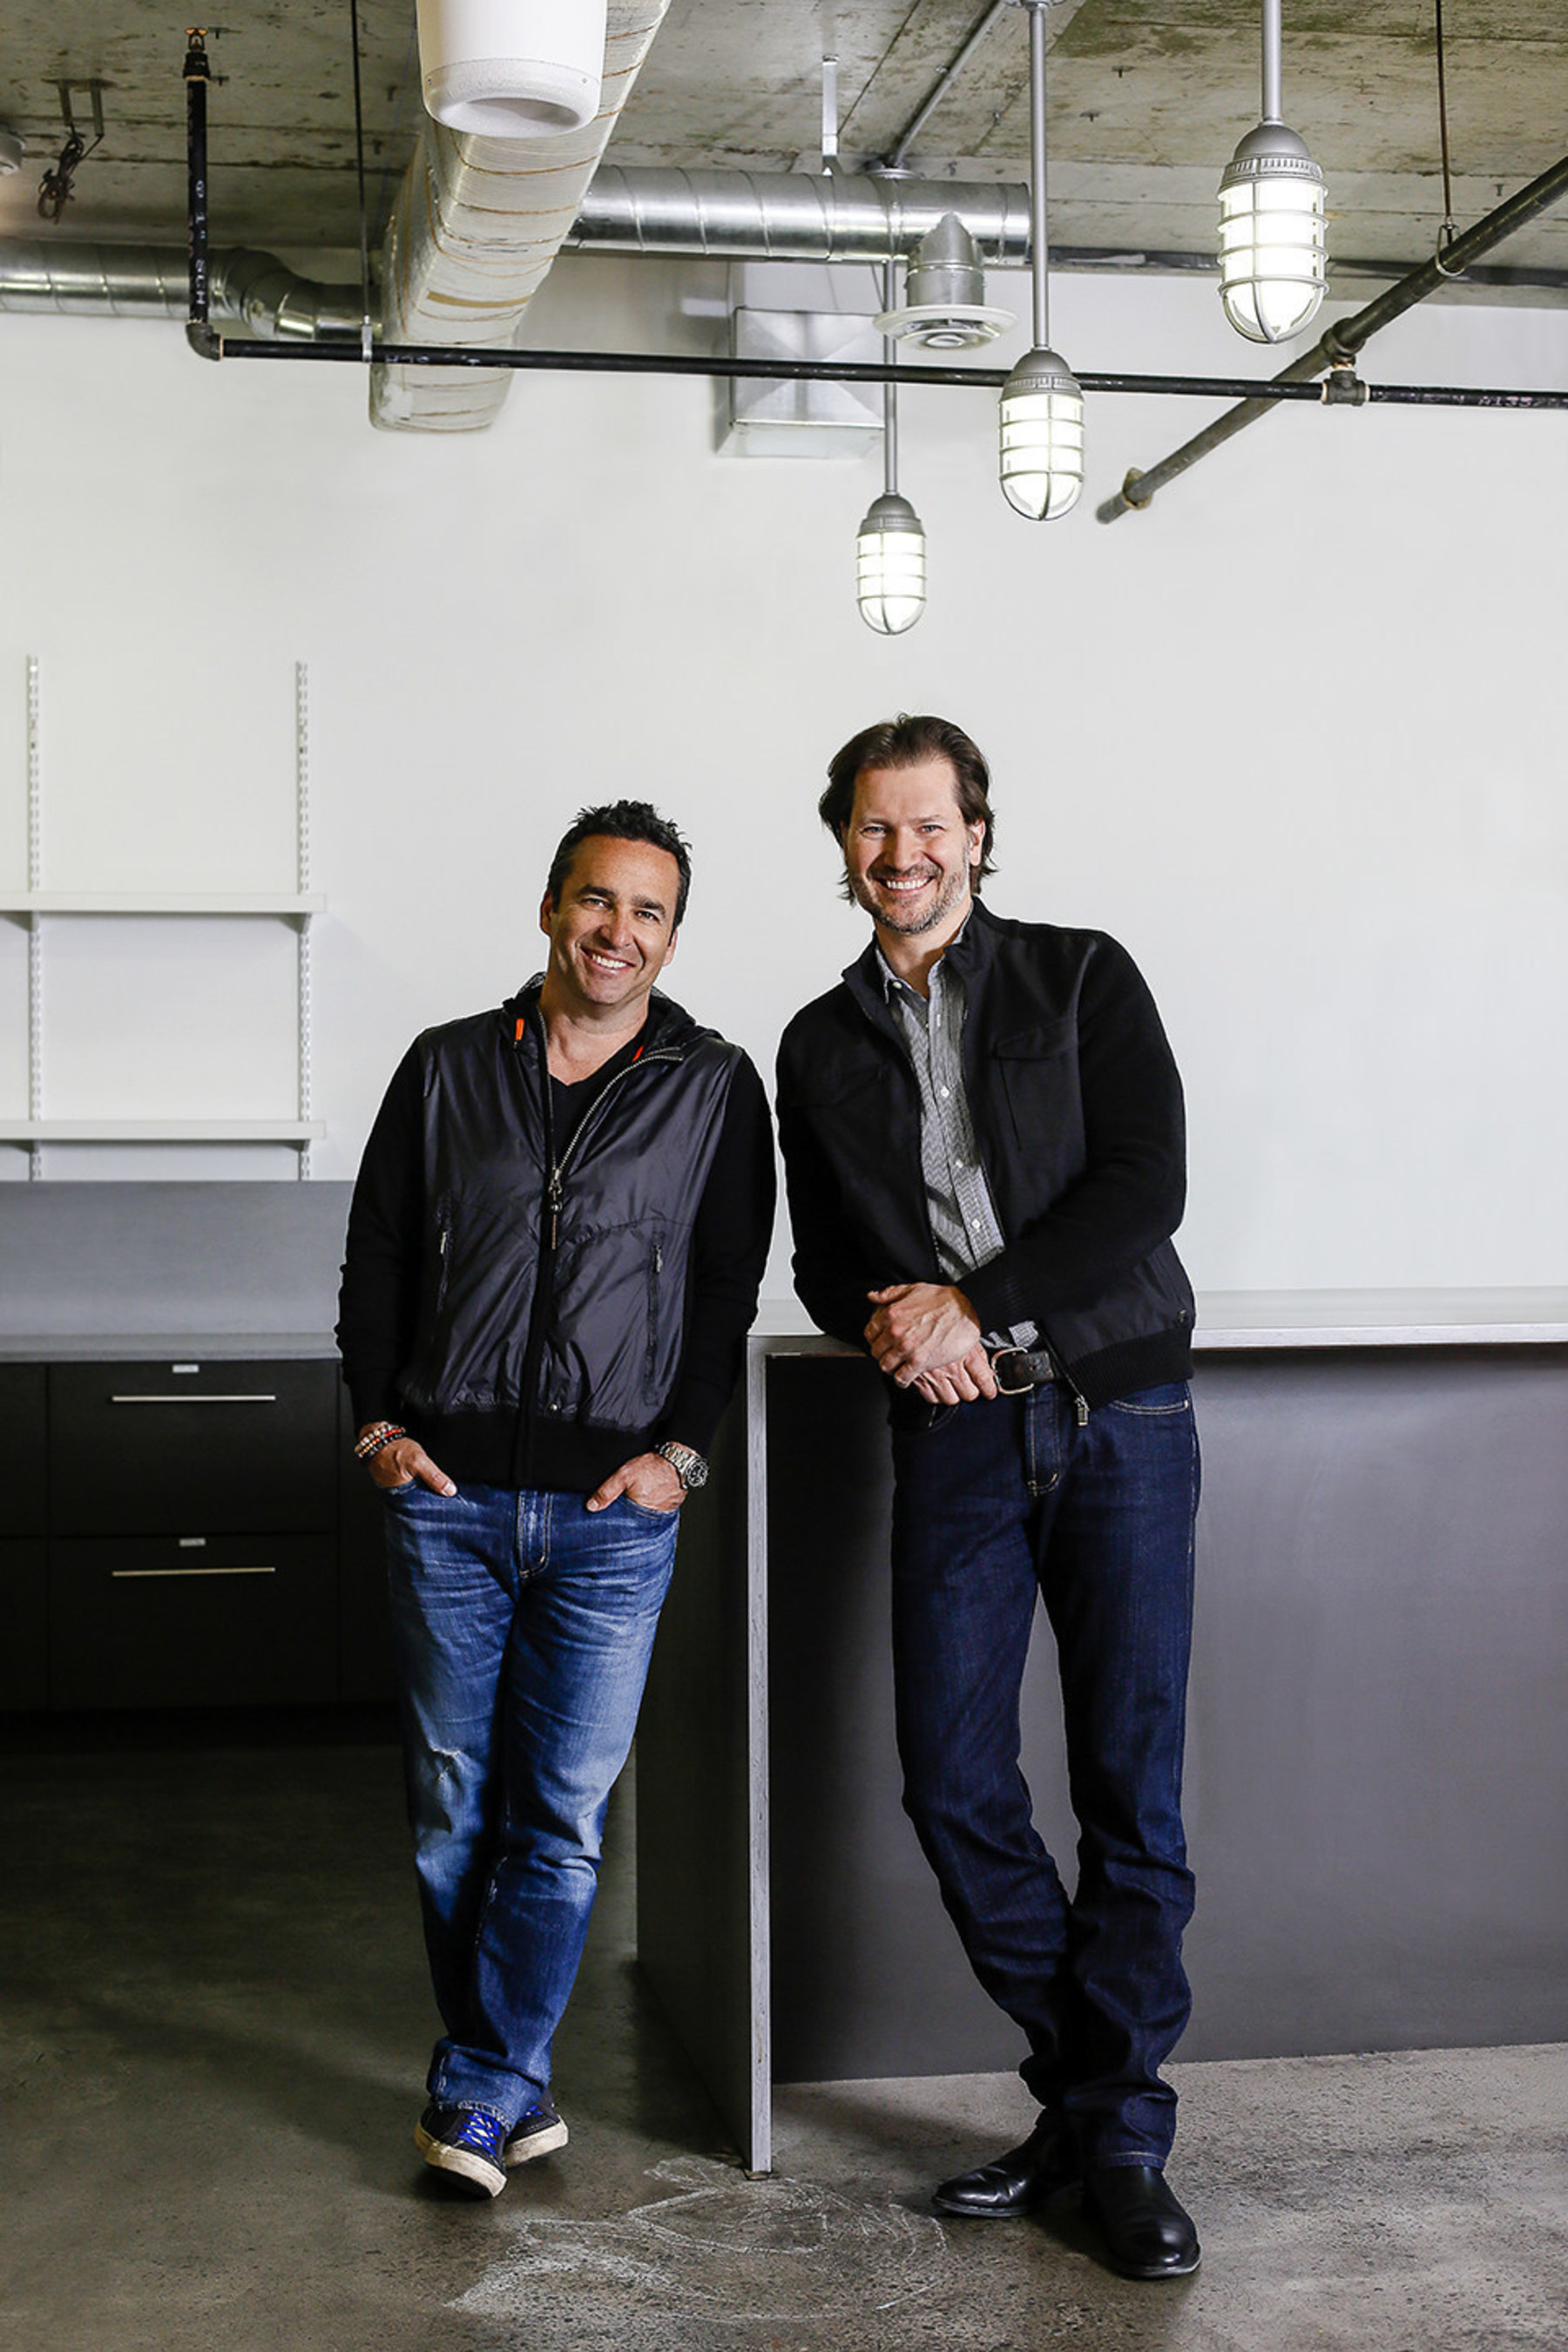 Newly appointed Avid Life Media CEO Rob Segal (left) and newly appointed President James Millership (right) are charting a new course for Avid Life Media and its flagship brand, Ashley Madison. Segal and Millership are pictured in the company's future head office, which is currently under construction in Toronto.